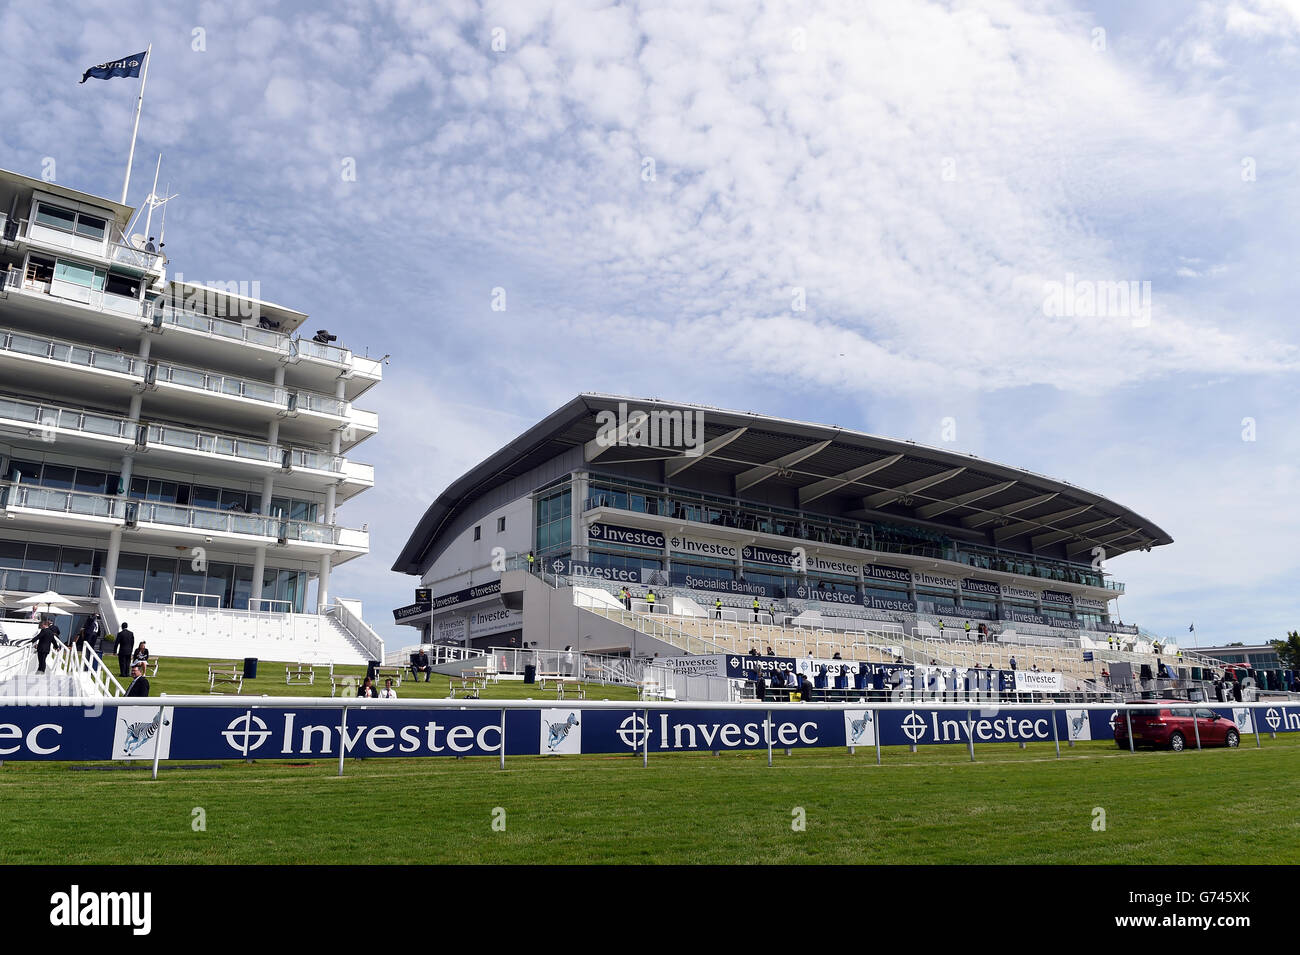 Horse Racing - Investec Ladies Day 2014 - Epsom Downs Racecourse. Investec branded stands during Investec Ladies Day at Epsom Downs Racecourse, Surrey. Stock Photo